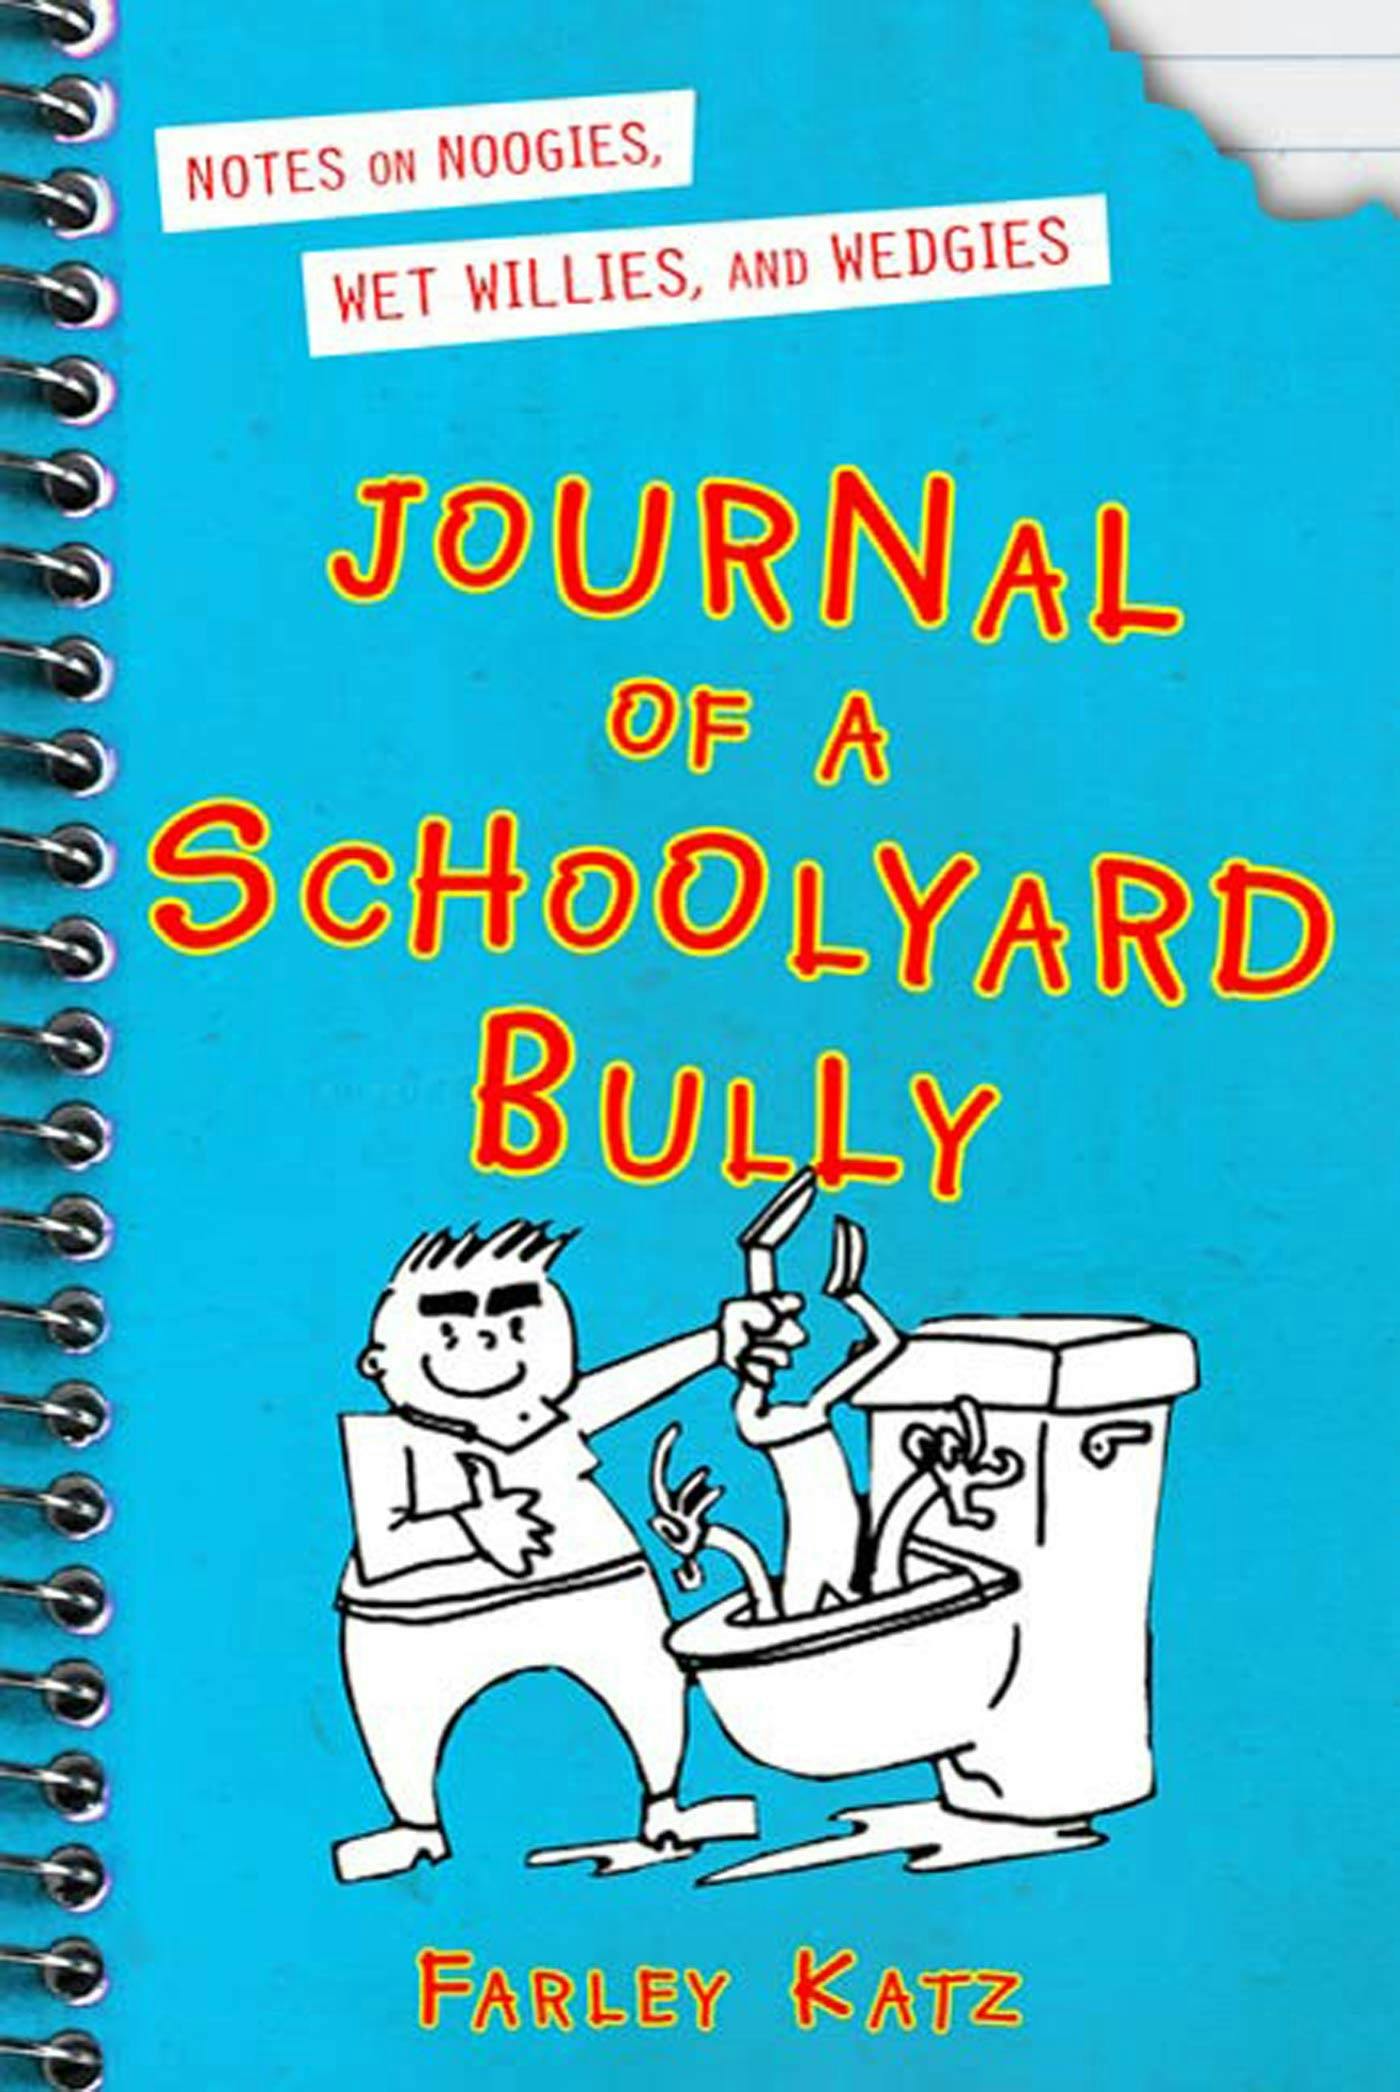 Journal of a Schoolyard Bully